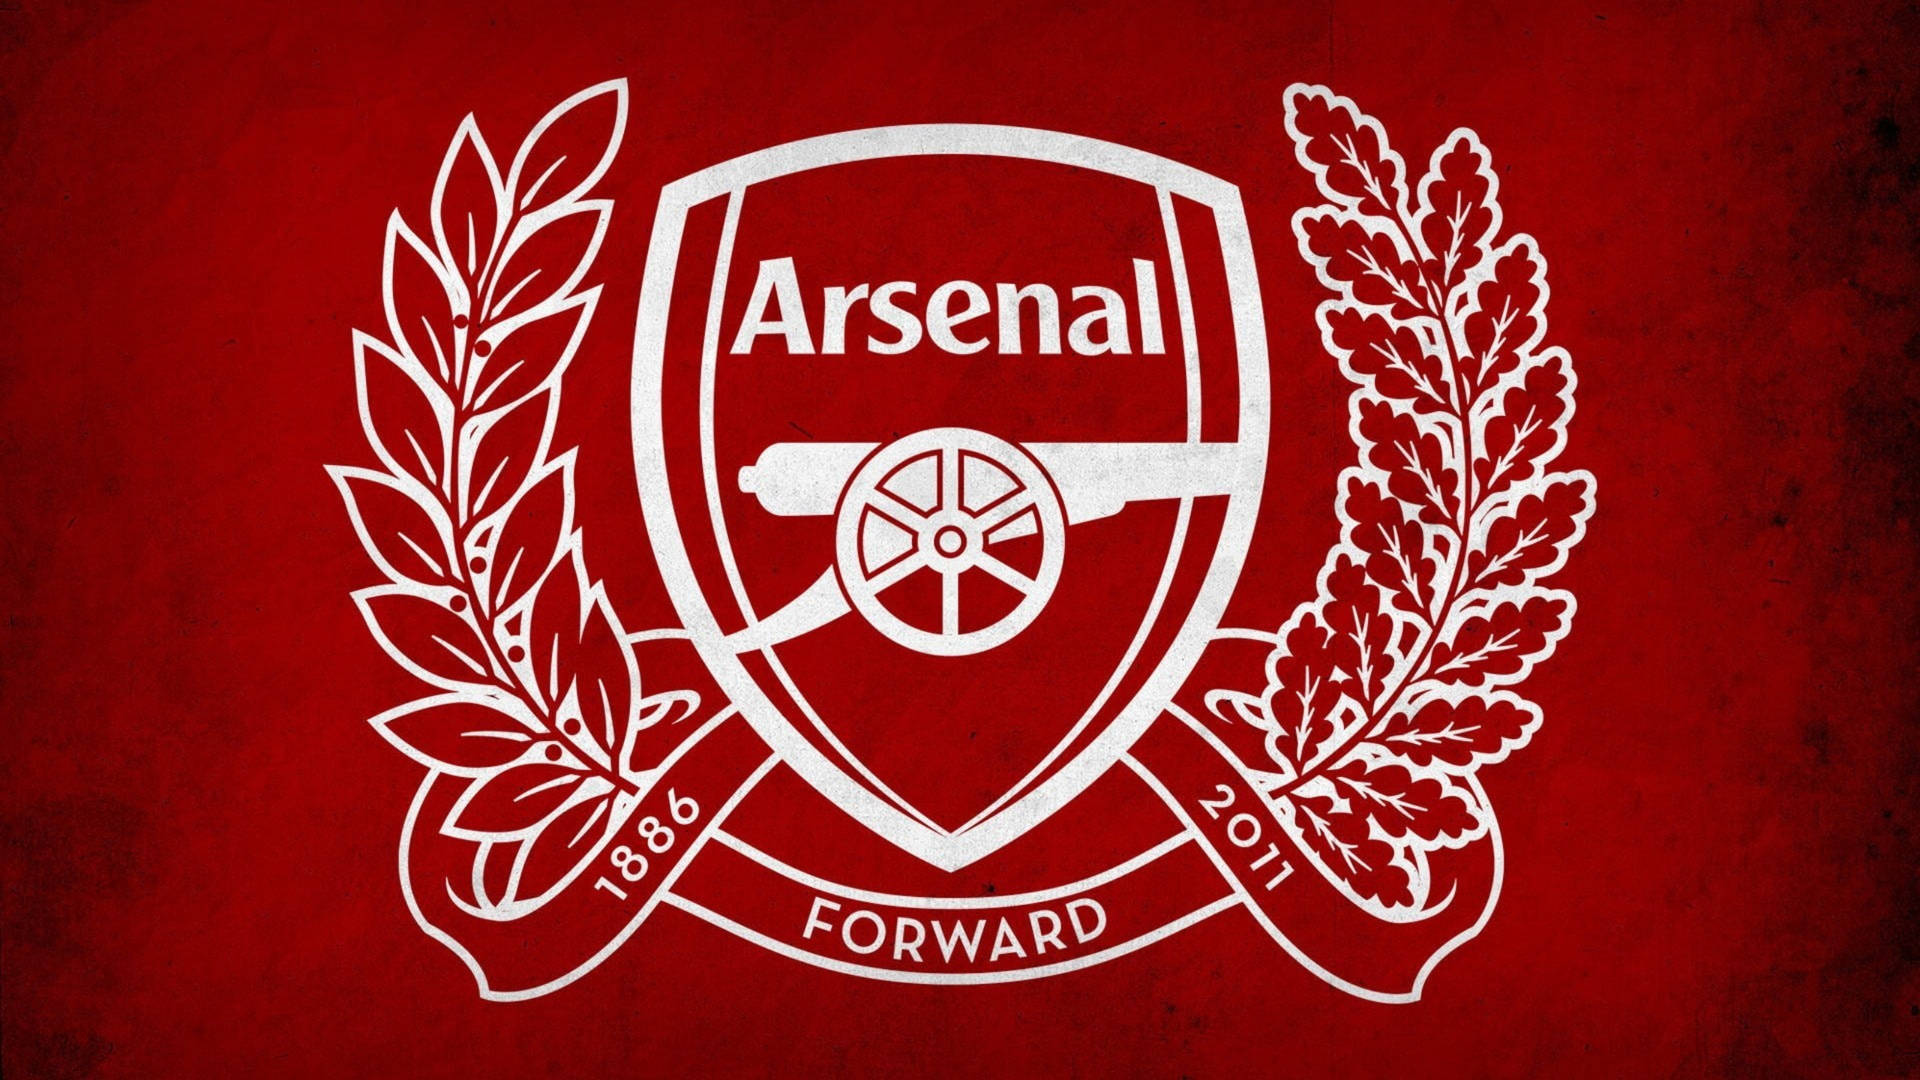 Arsenal Tattoo Ideas Designs Images Sleeve Arm Quotes  Football